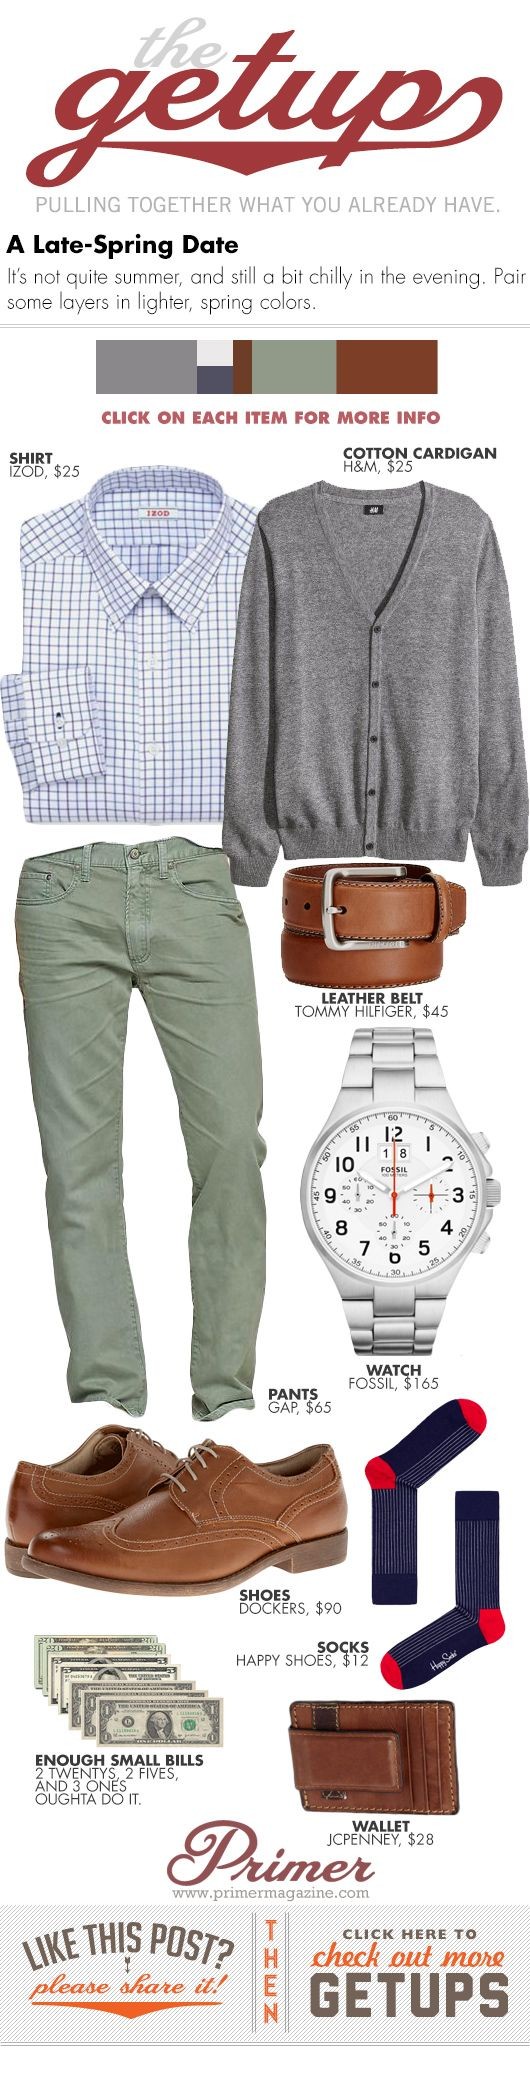 The Getup: Late-Spring Date - Primer #casual #mens...